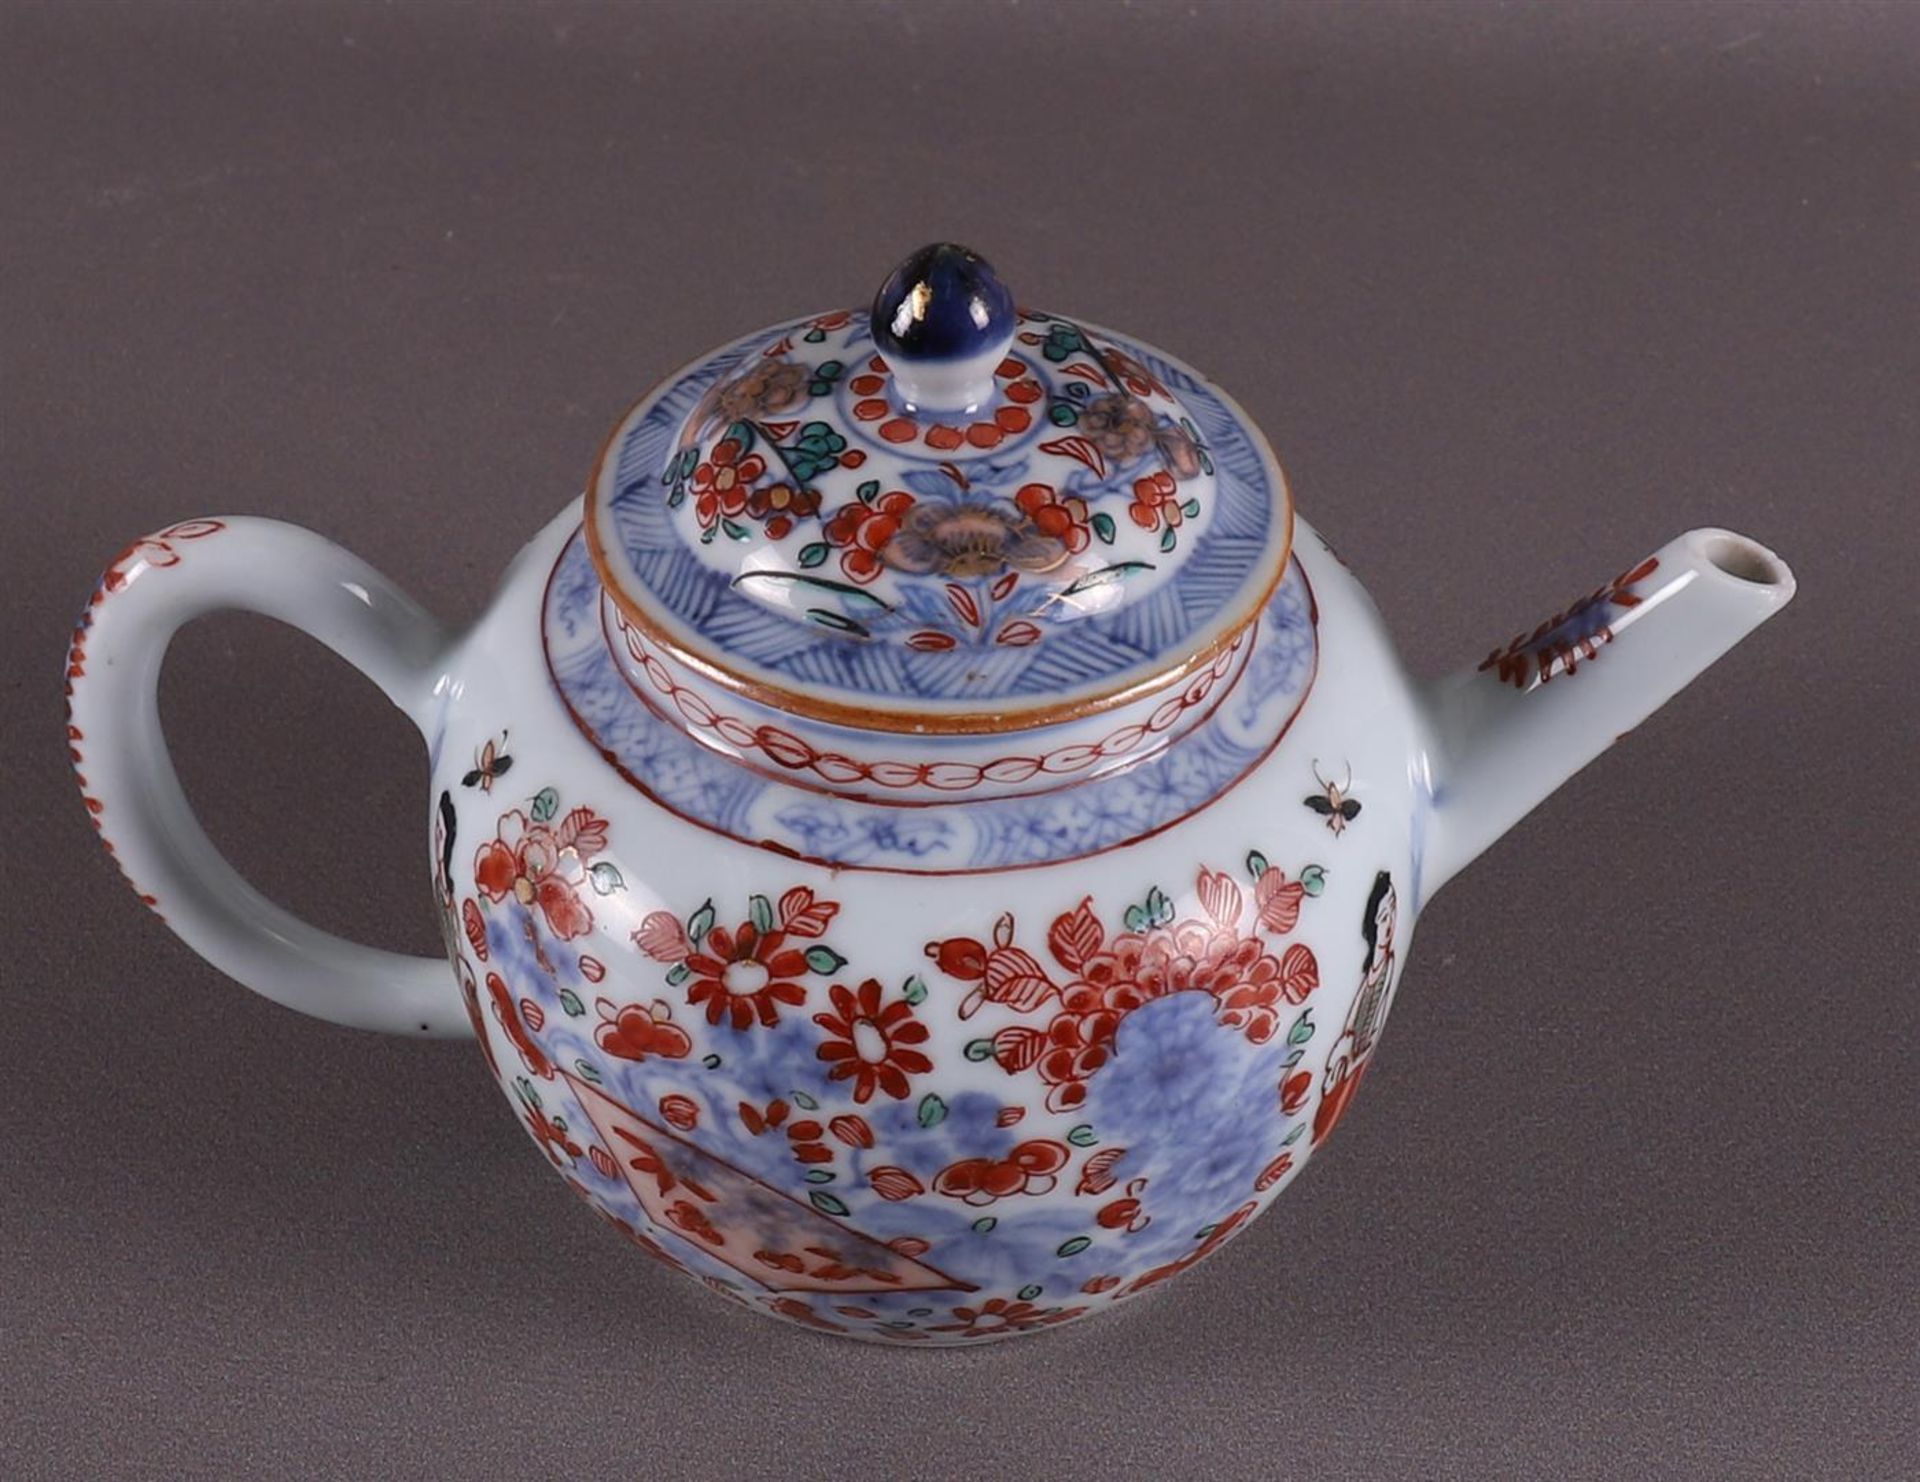 A spherical porcelain Amsterdam variegated teapot, China, 18th century. Polychrome decoration of a